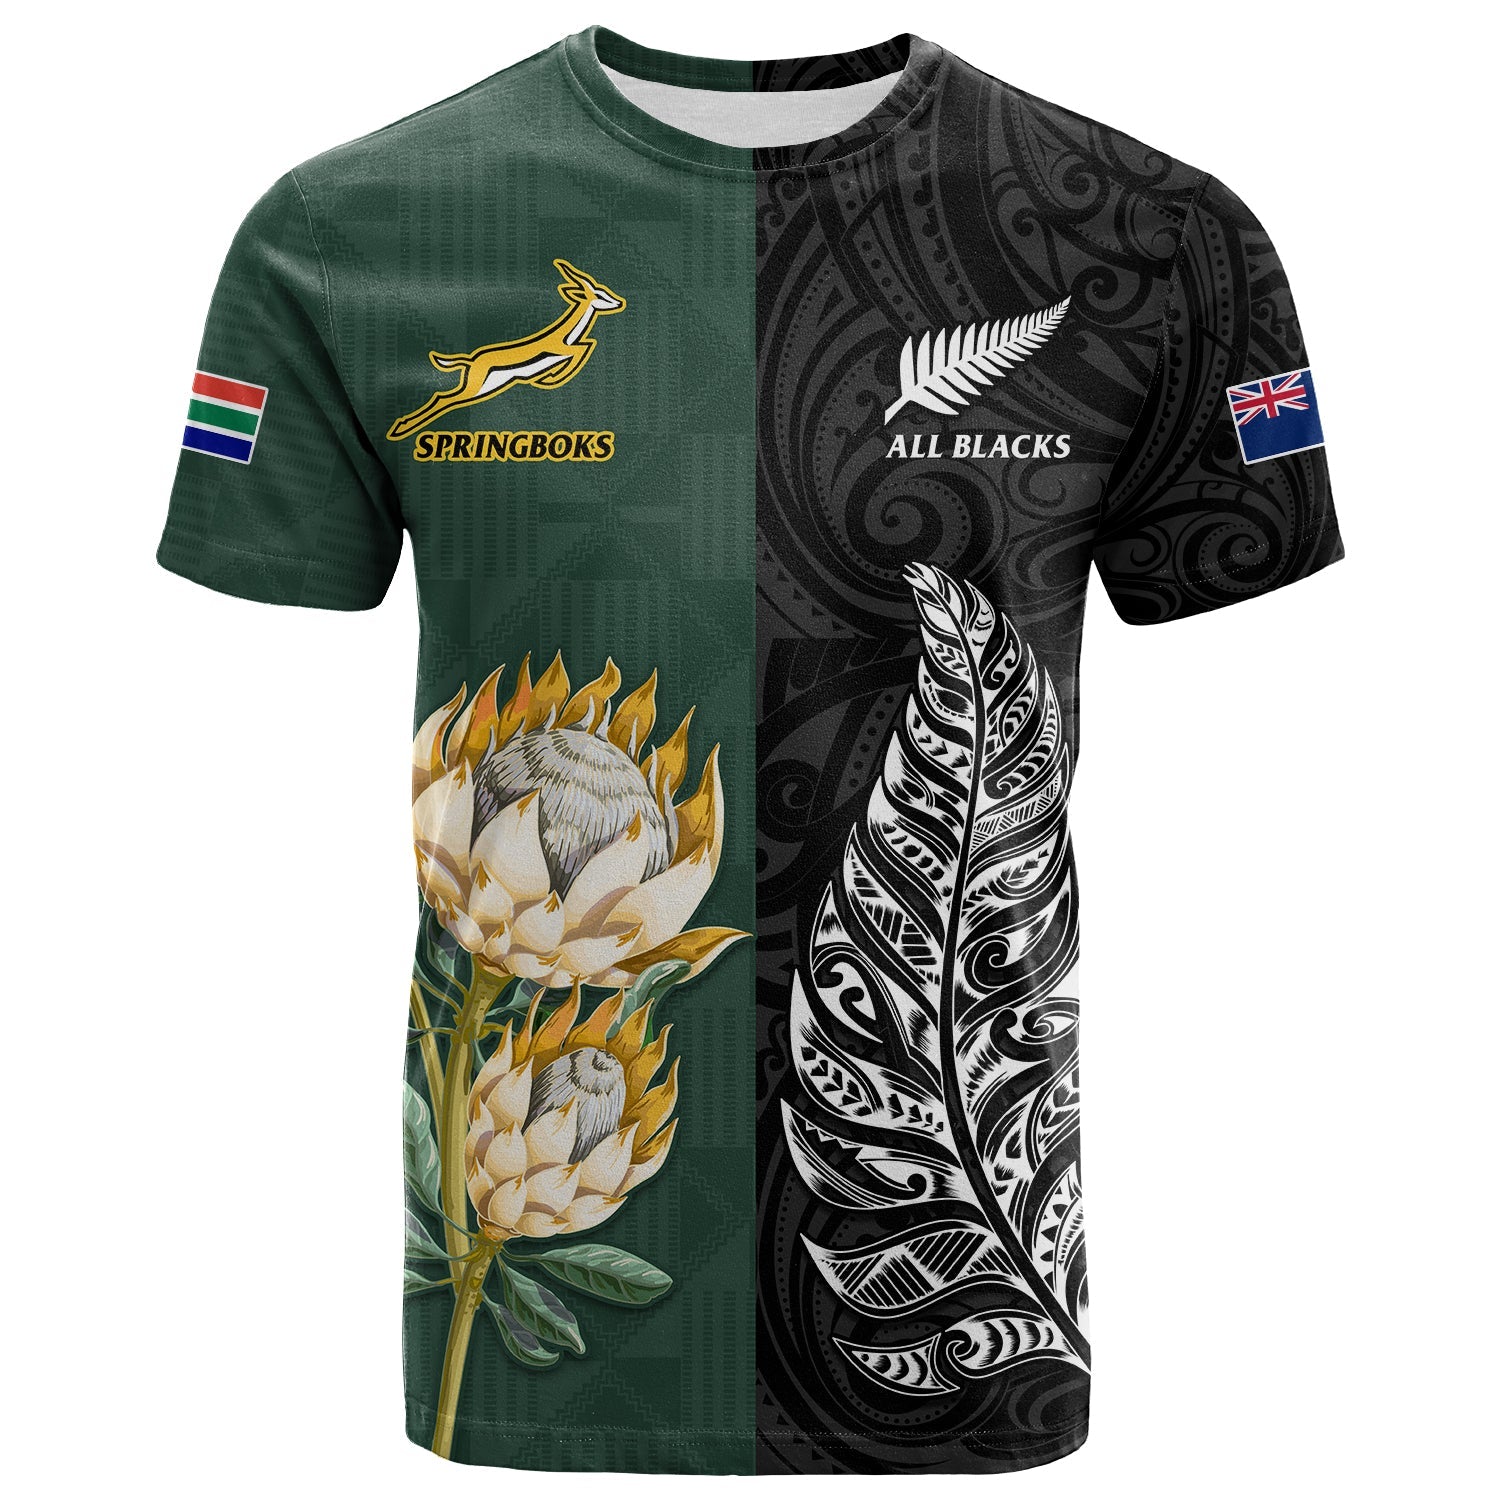 South Africa Protea and New Zealand Fern T Shirt Rugby Go Springboks vs All Black LT13 Art - Polynesian Pride